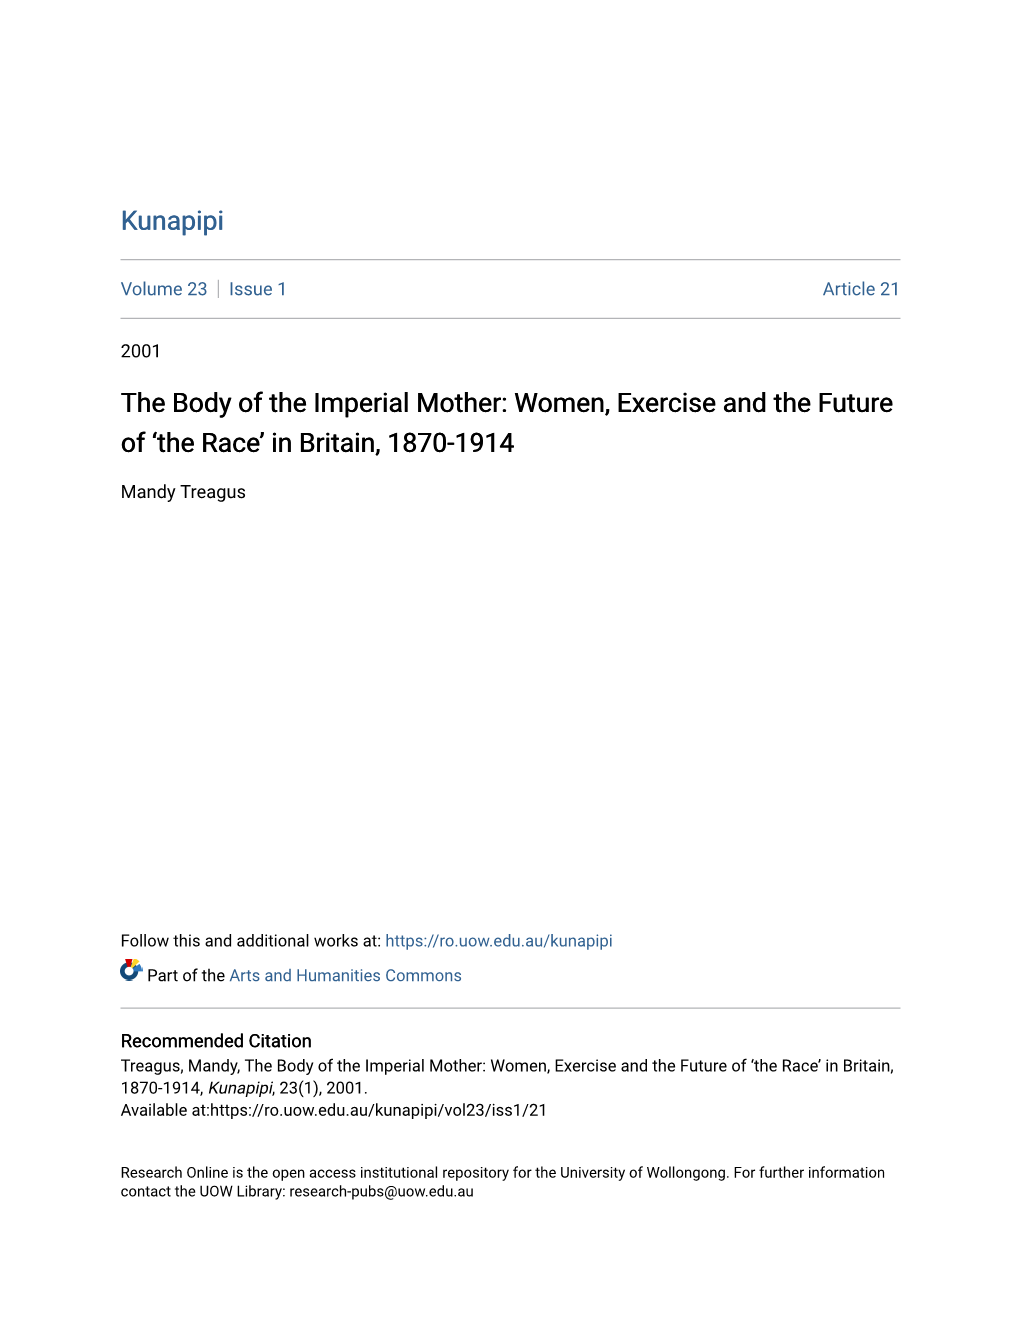 The Body of the Imperial Mother: Women, Exercise and the Future of ‘The Race’ in Britain, 1870-1914